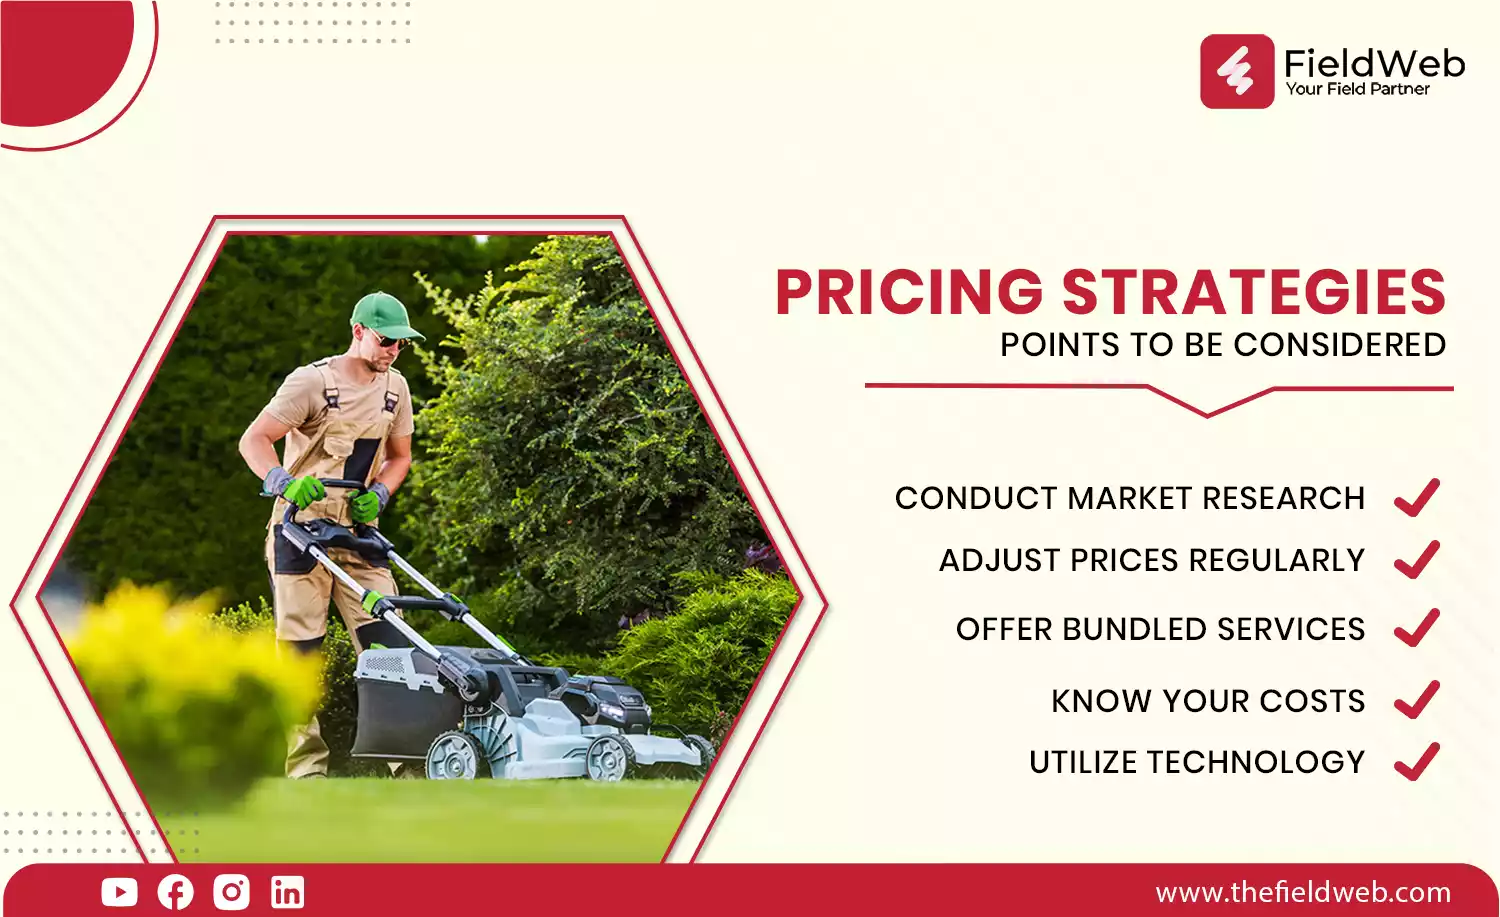 image is displaying lawn care pricing strategies